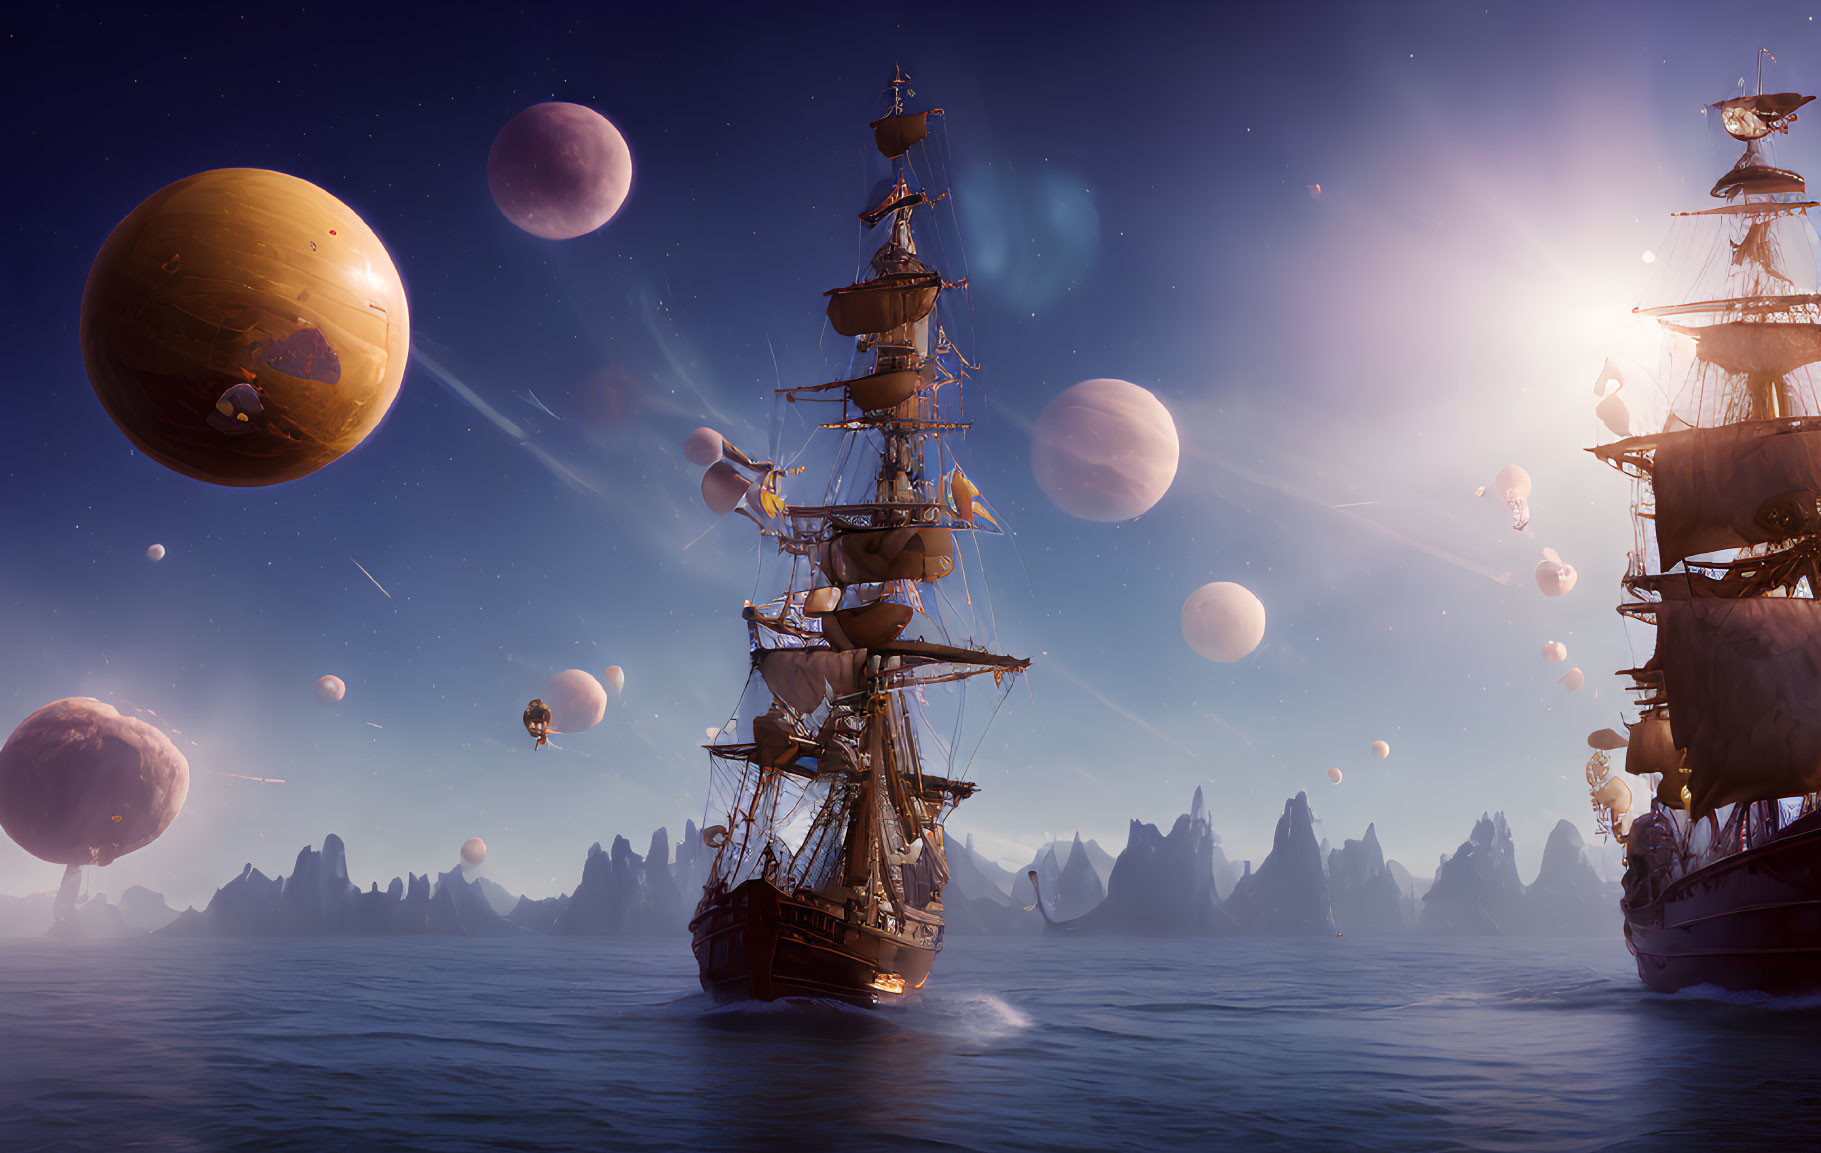 Fantastical planets and moons over serene ocean with sailing ships